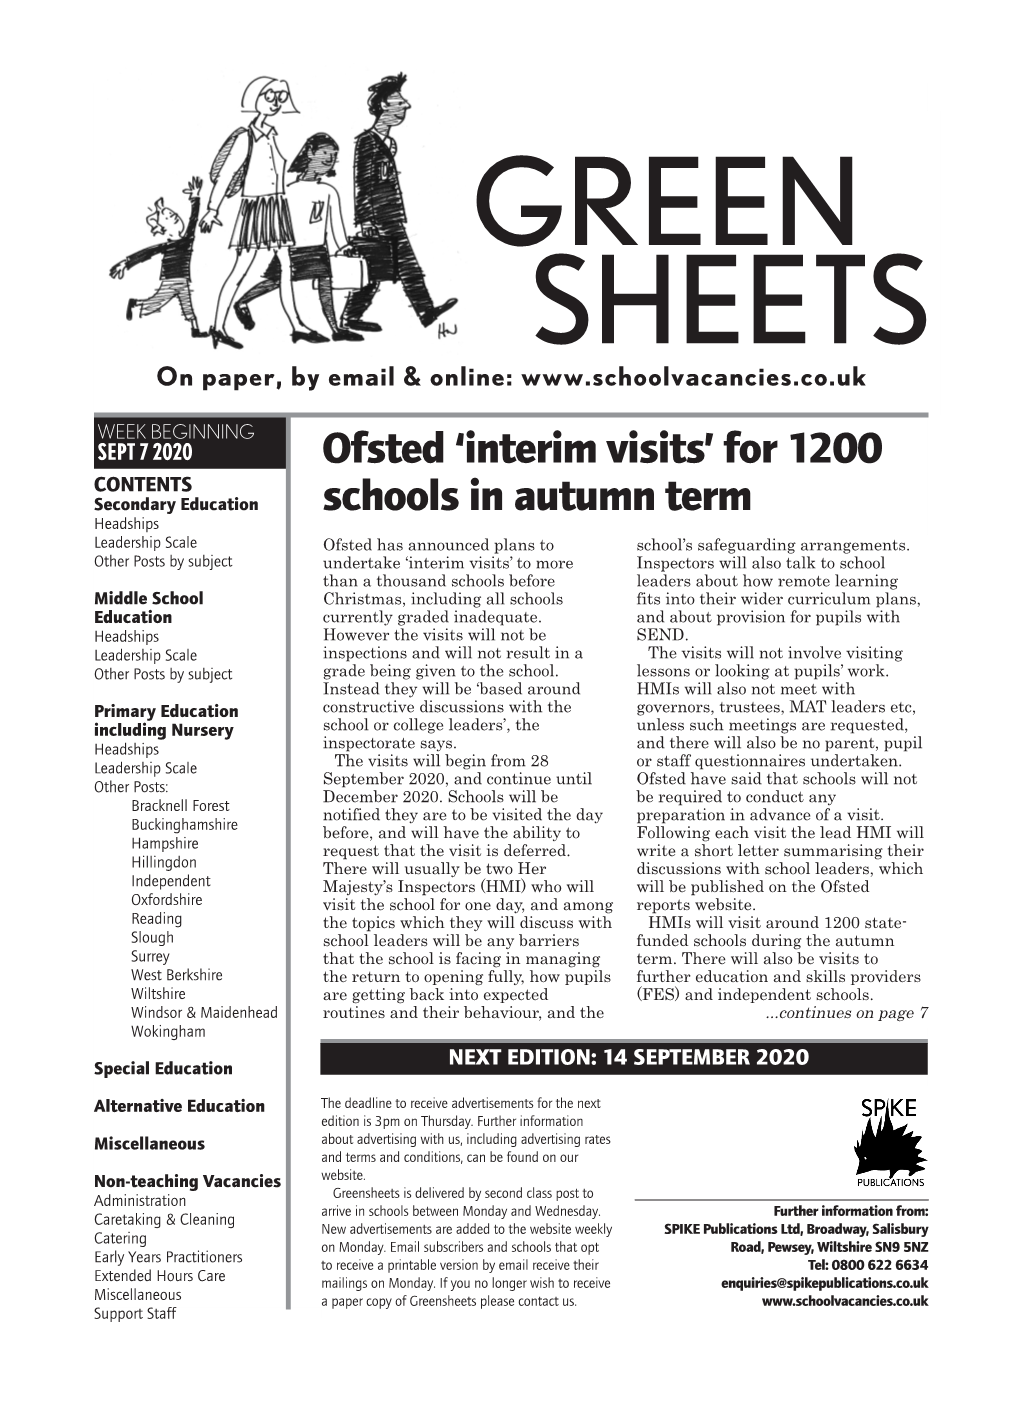 Ofsted 'Interim Visits' for 1200 Schools in Autumn Term